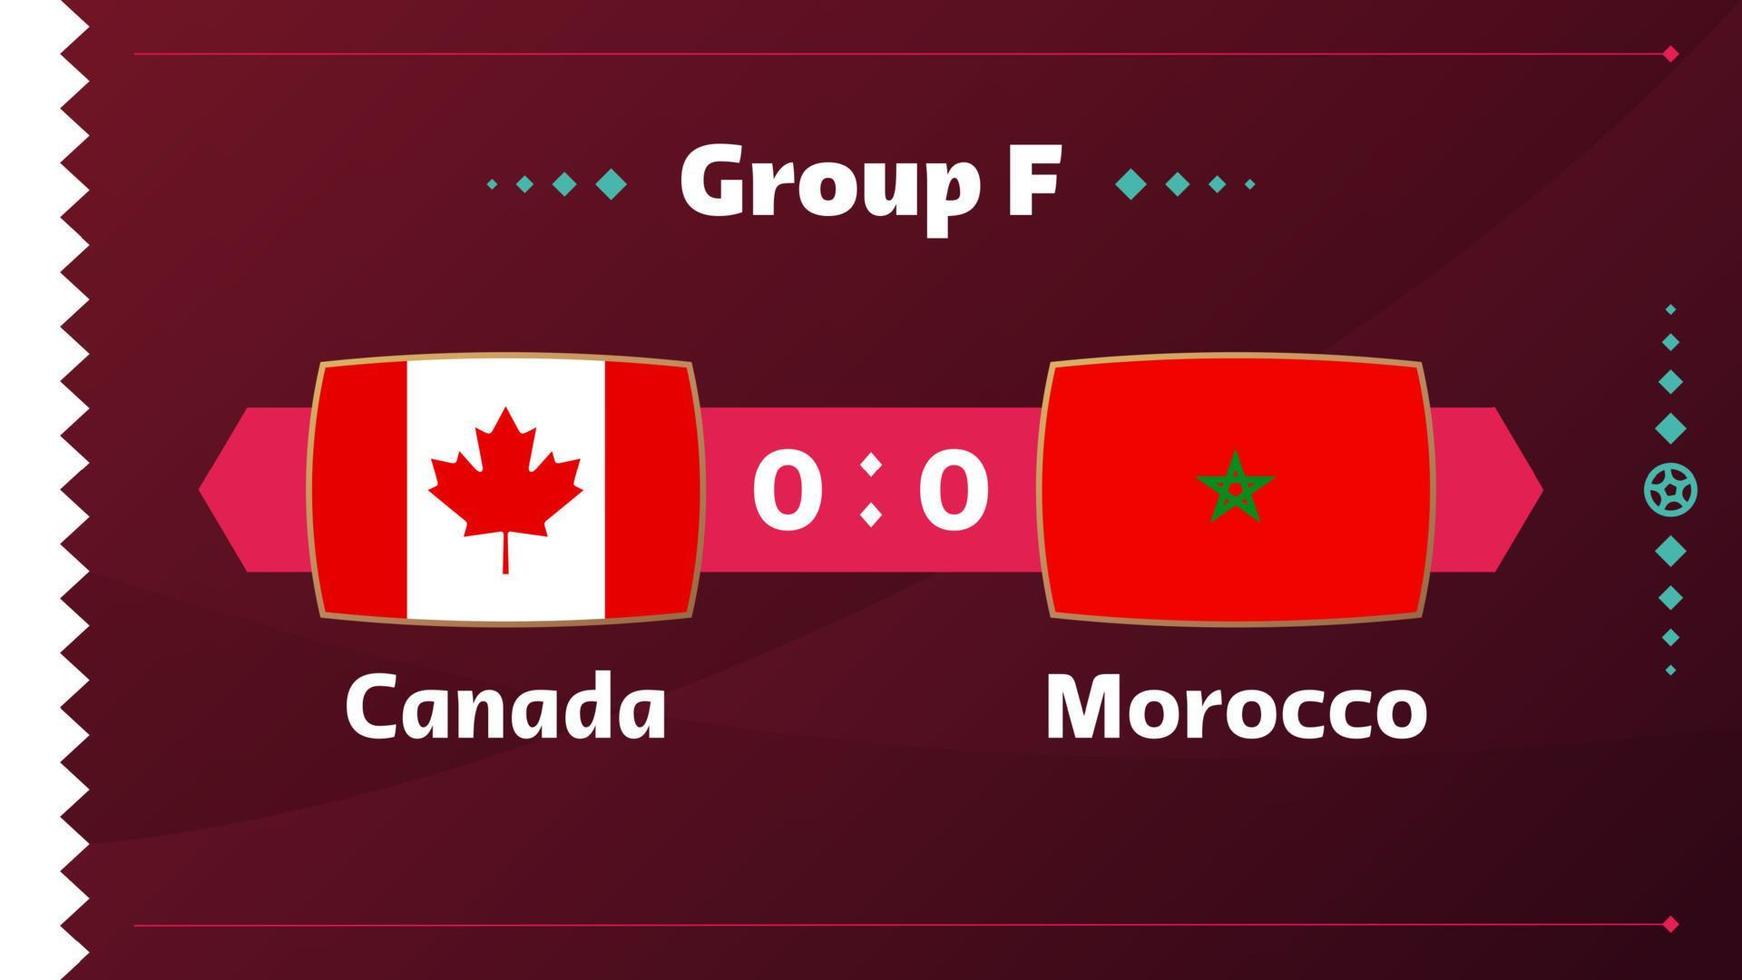 Canada vs Morocco, Football 2022, Group F. World Football Competition championship match versus teams intro sport background, championship competition final poster, vector illustration.